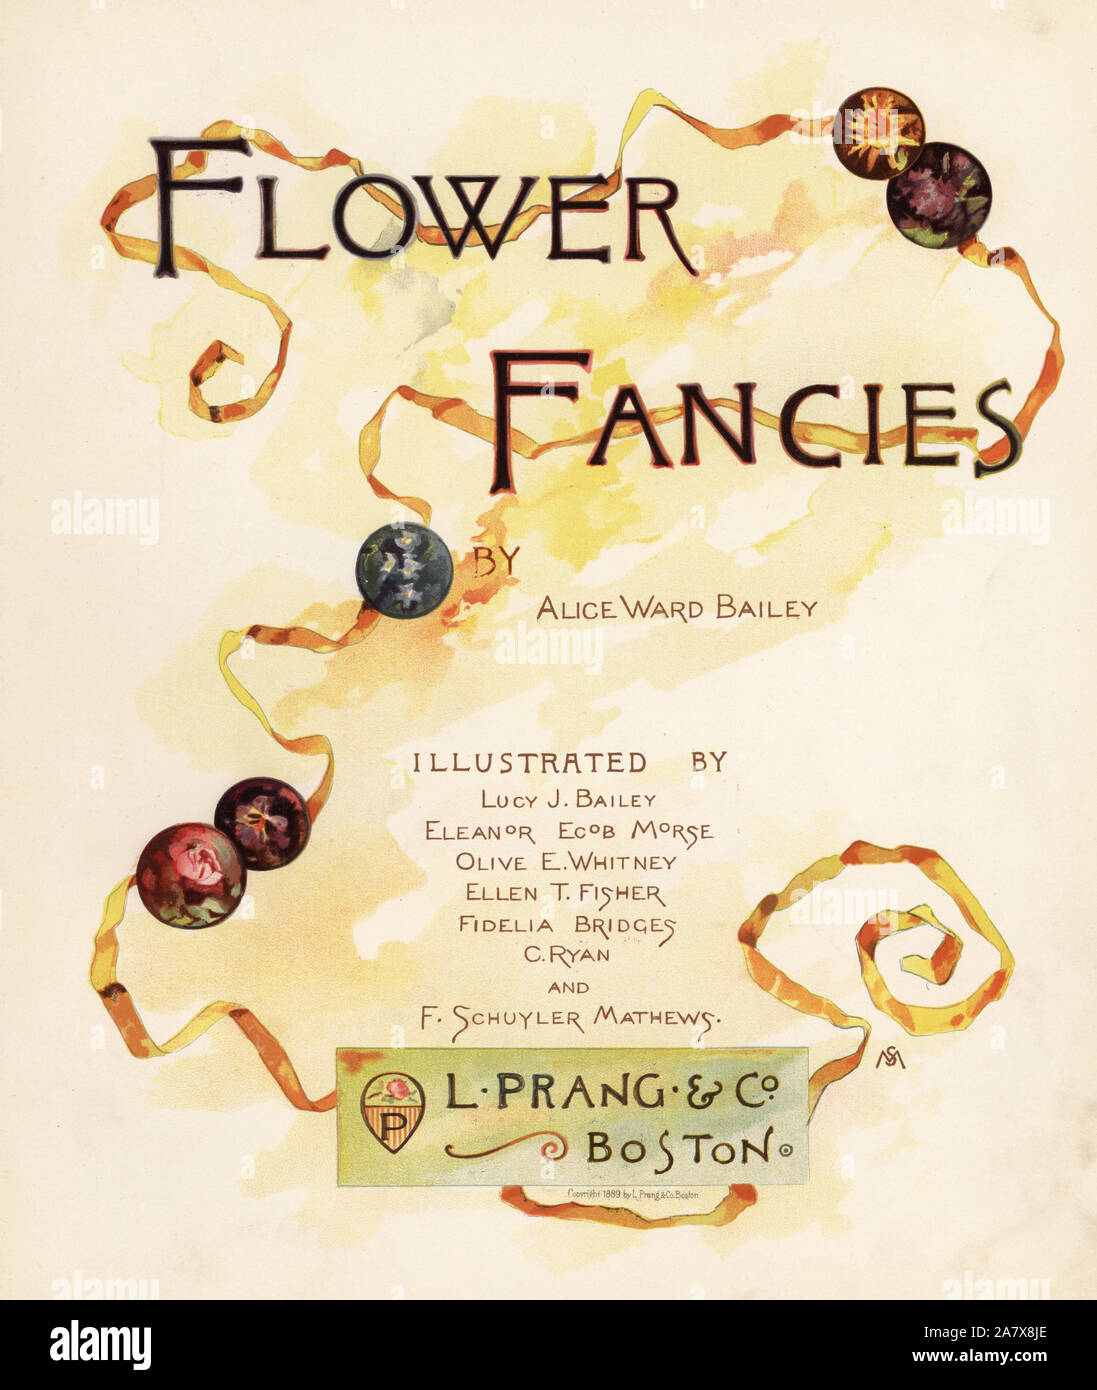 Calligraphic title page with ribbons and ornaments. Chromolithograph by Louis Prang after an illustration by F. Schuyler Mathews from Alice Ward Bailey's Flower Fancies, Boston, 1889. Illustrated by Lucy Baily, Eleanor Ecob Morse, Olive Whitney, Ellen Fisher, Fidelia Bridges, C. Ryan and F. Schuyler Mathews. Stock Photo